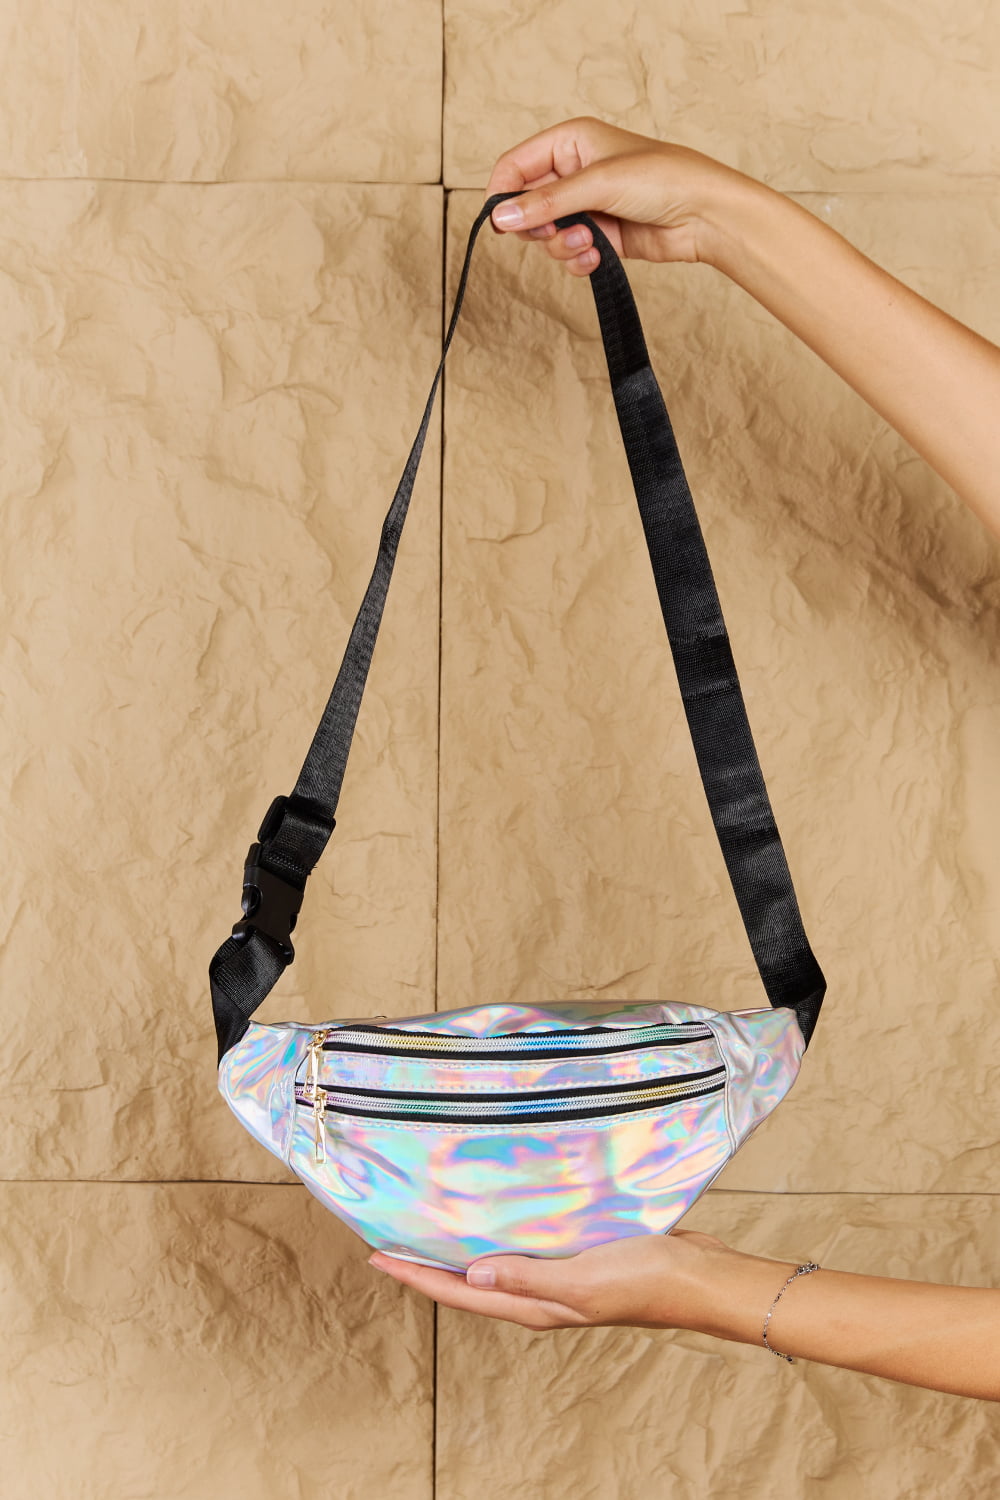 Fame Holographic 80s Double Zipper Fanny Pack in Silver Waist Pack, Small Purse, Waist Belt Purse Good Vibrations